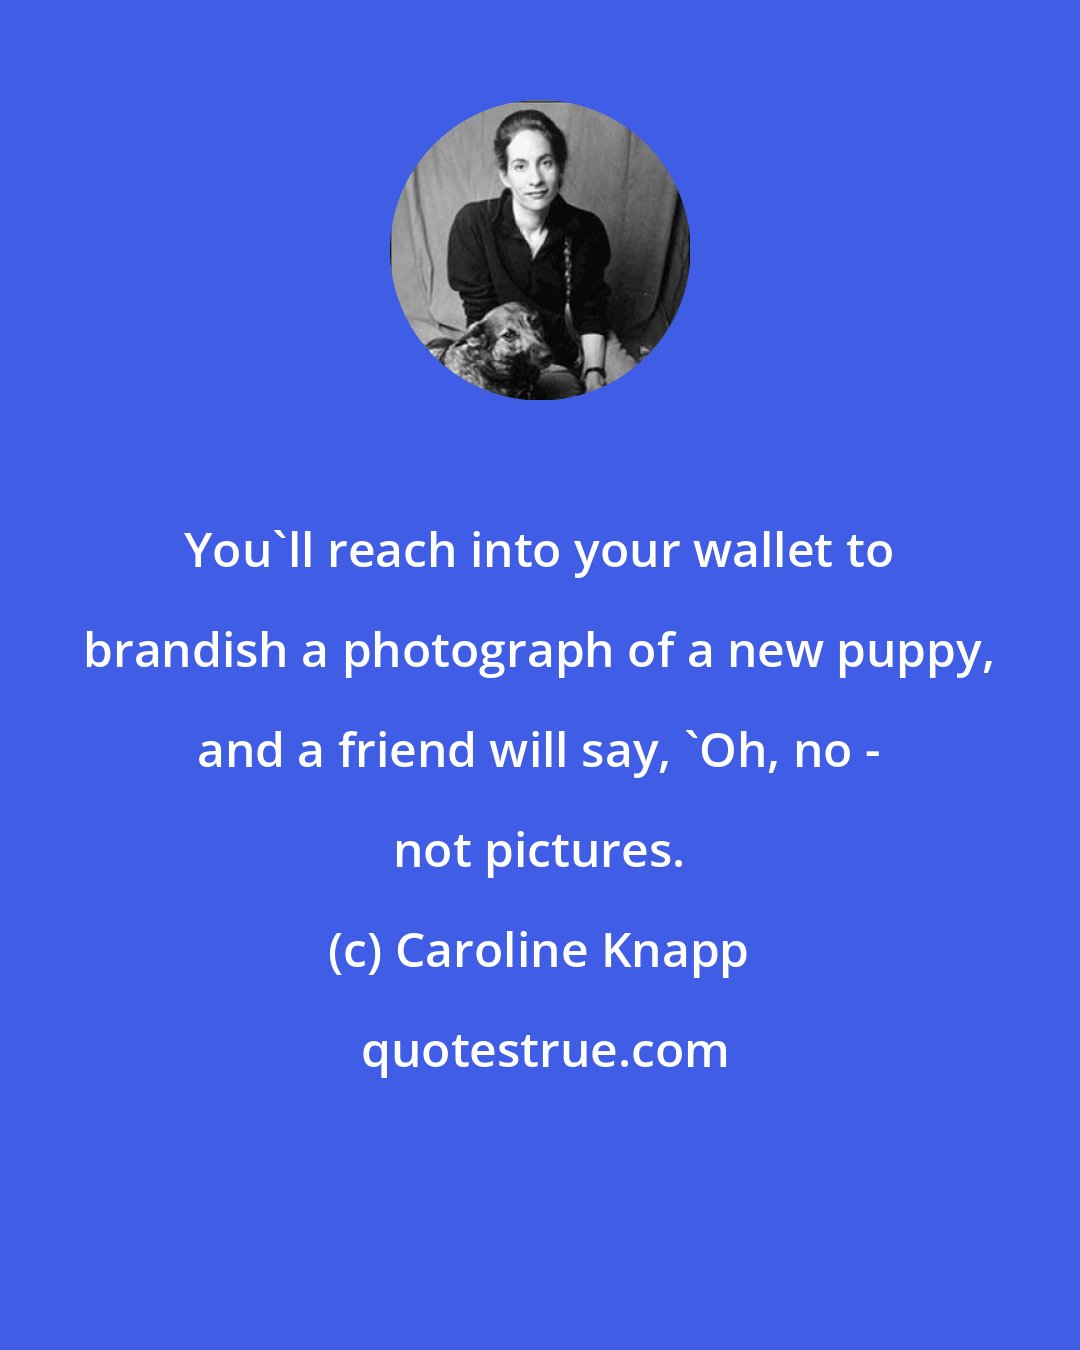 Caroline Knapp: You'll reach into your wallet to brandish a photograph of a new puppy, and a friend will say, 'Oh, no - not pictures.